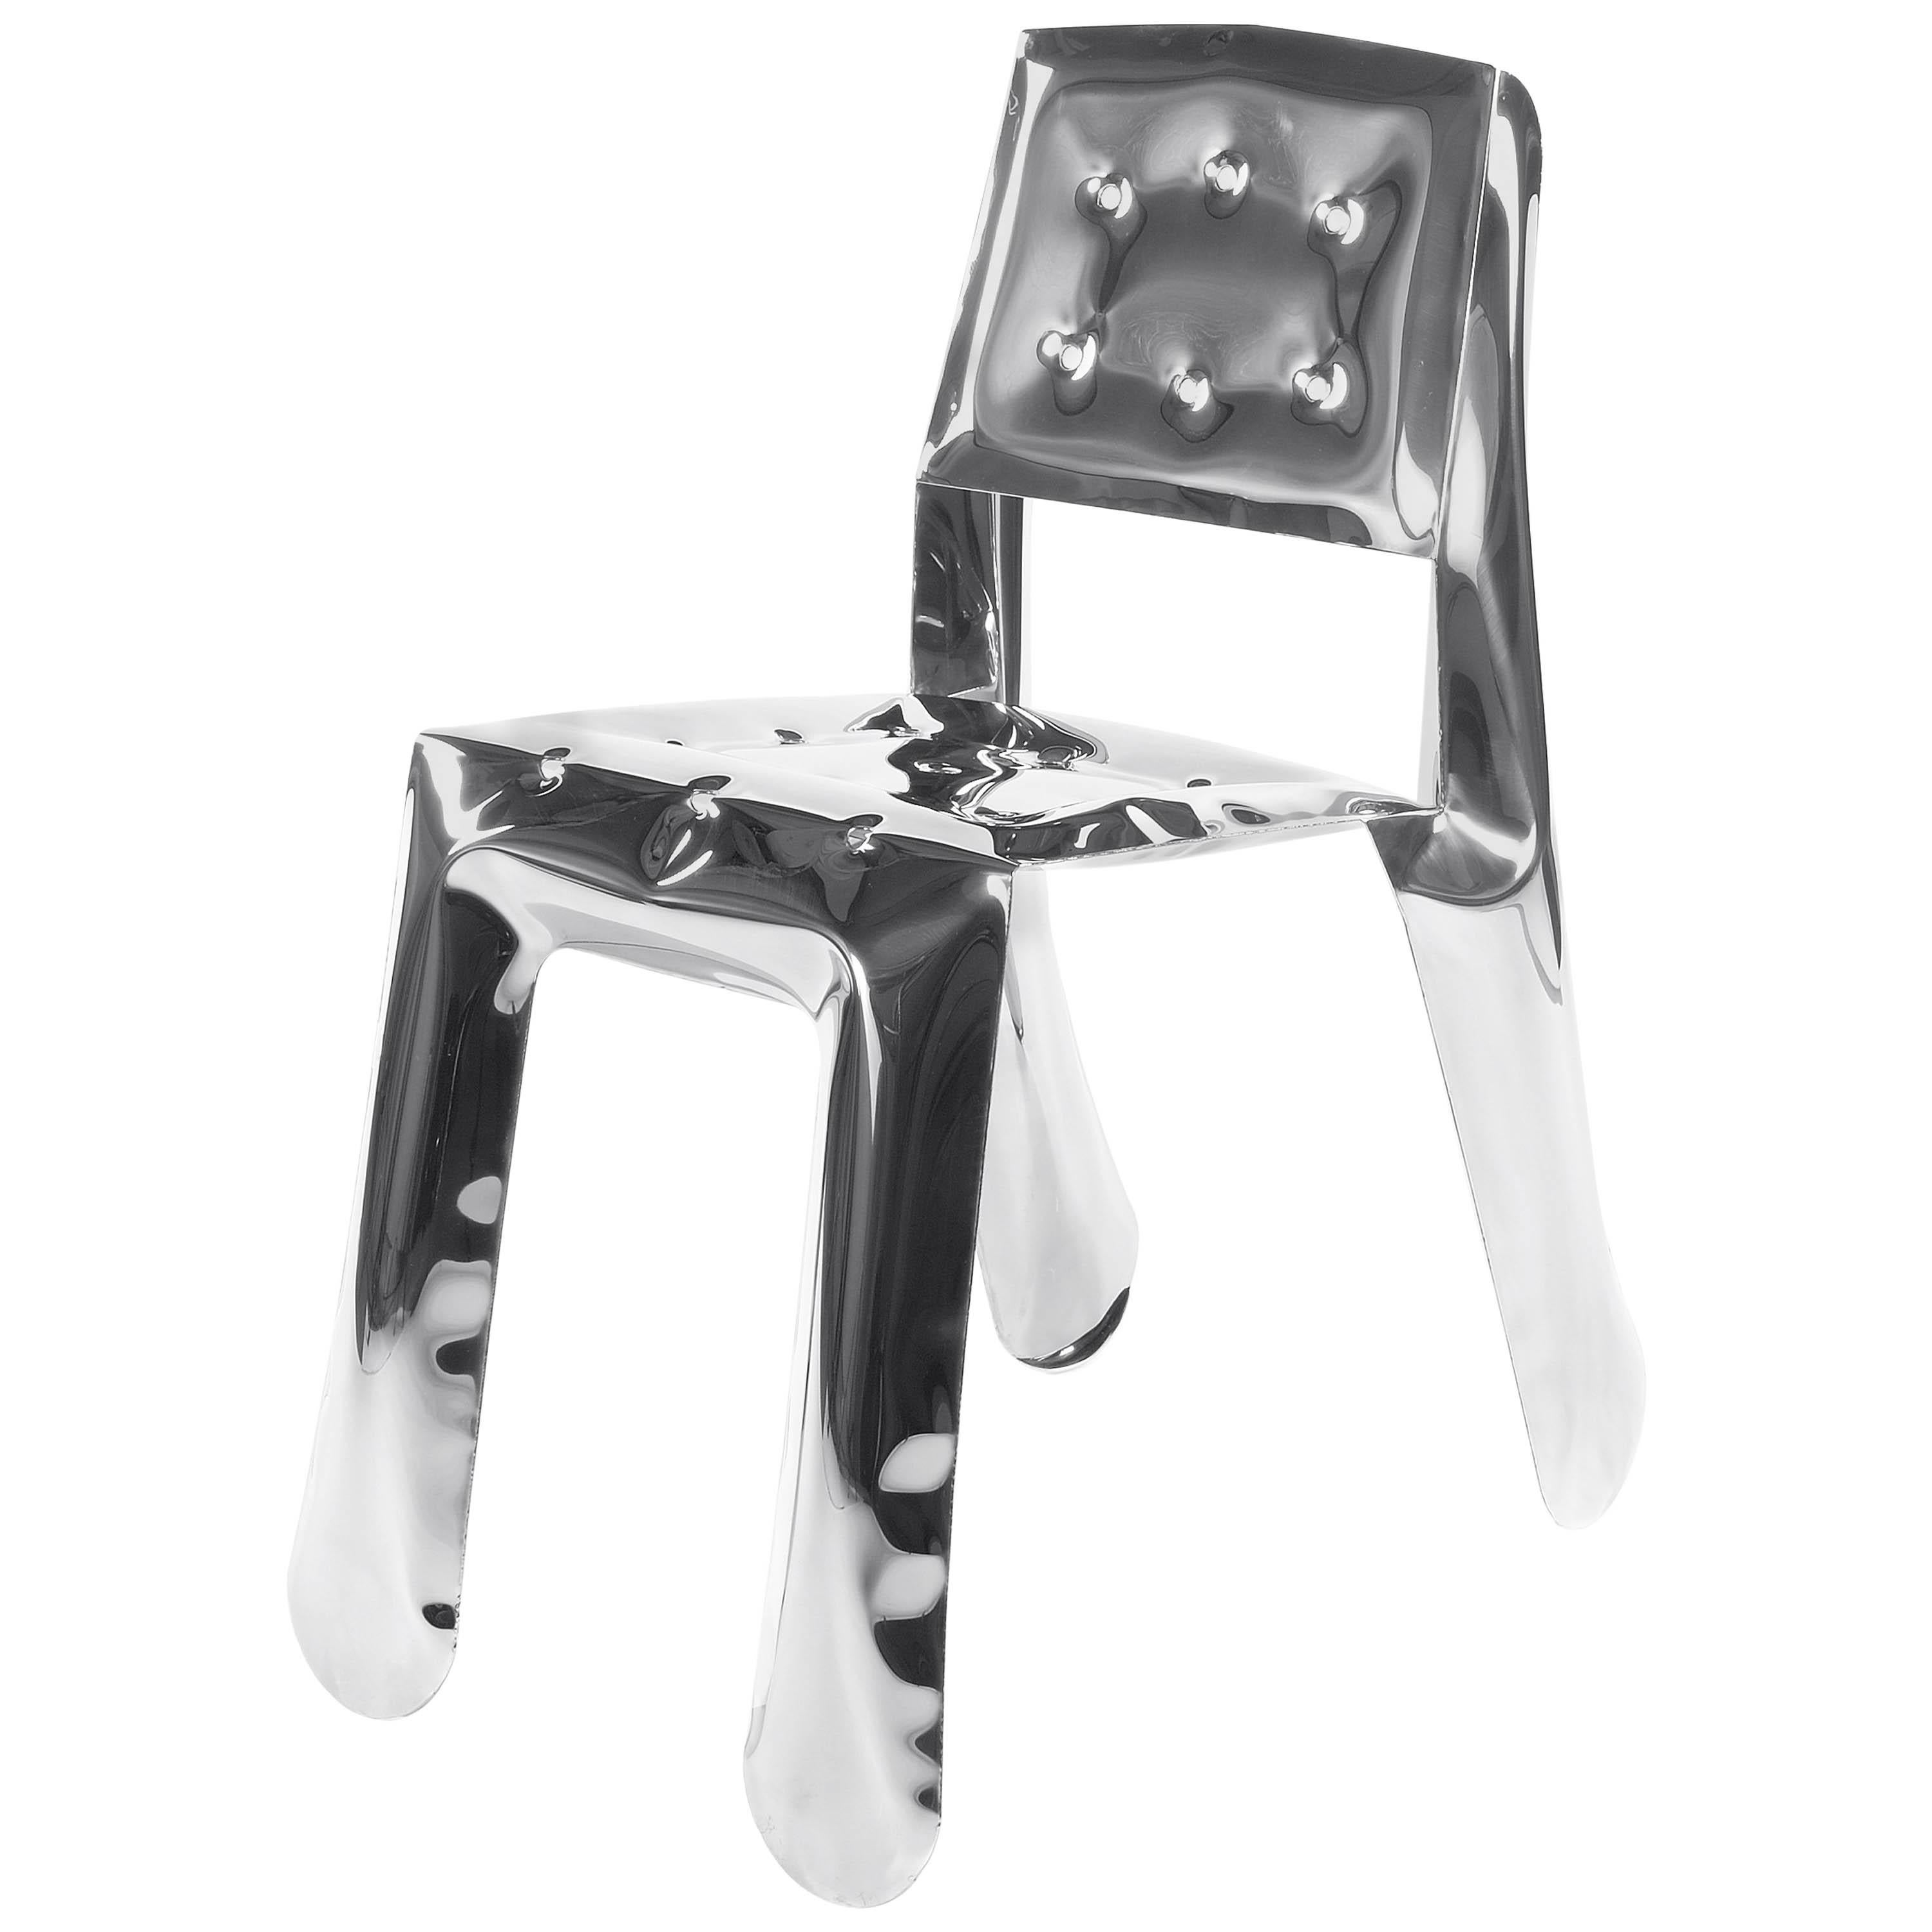 Limited Edition Chippensteel 0.5 Chair in Polished Stainless Steel by Zieta For Sale